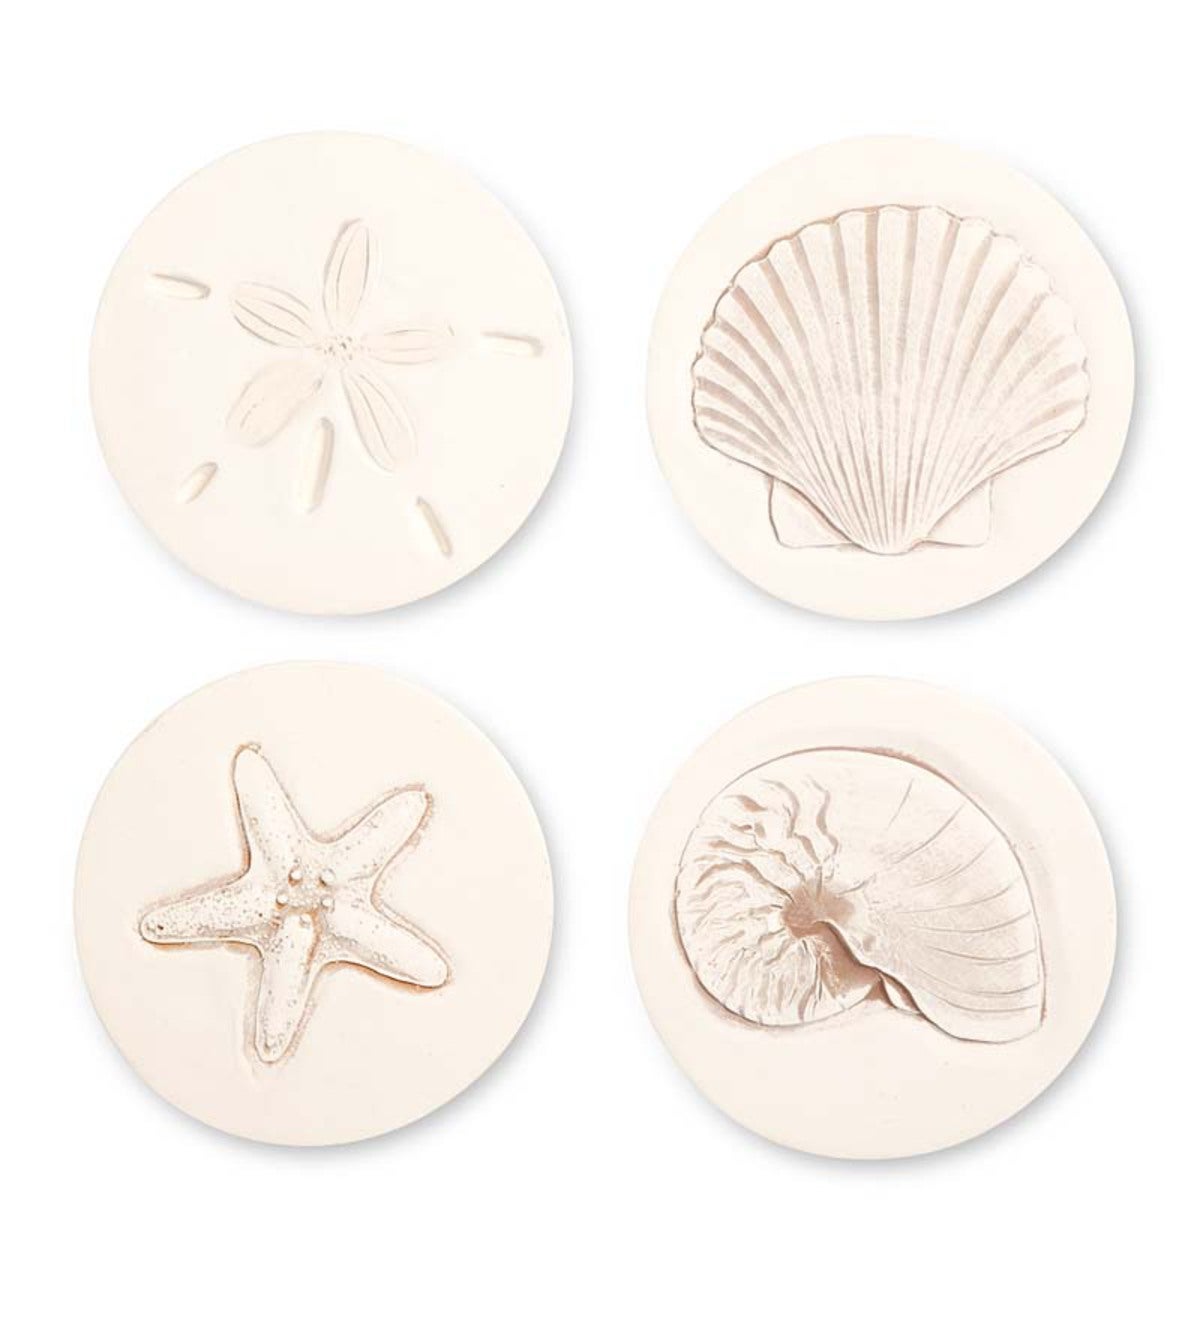 Handcrafted Nautical Clay Coasters, Set of 4 - Shell